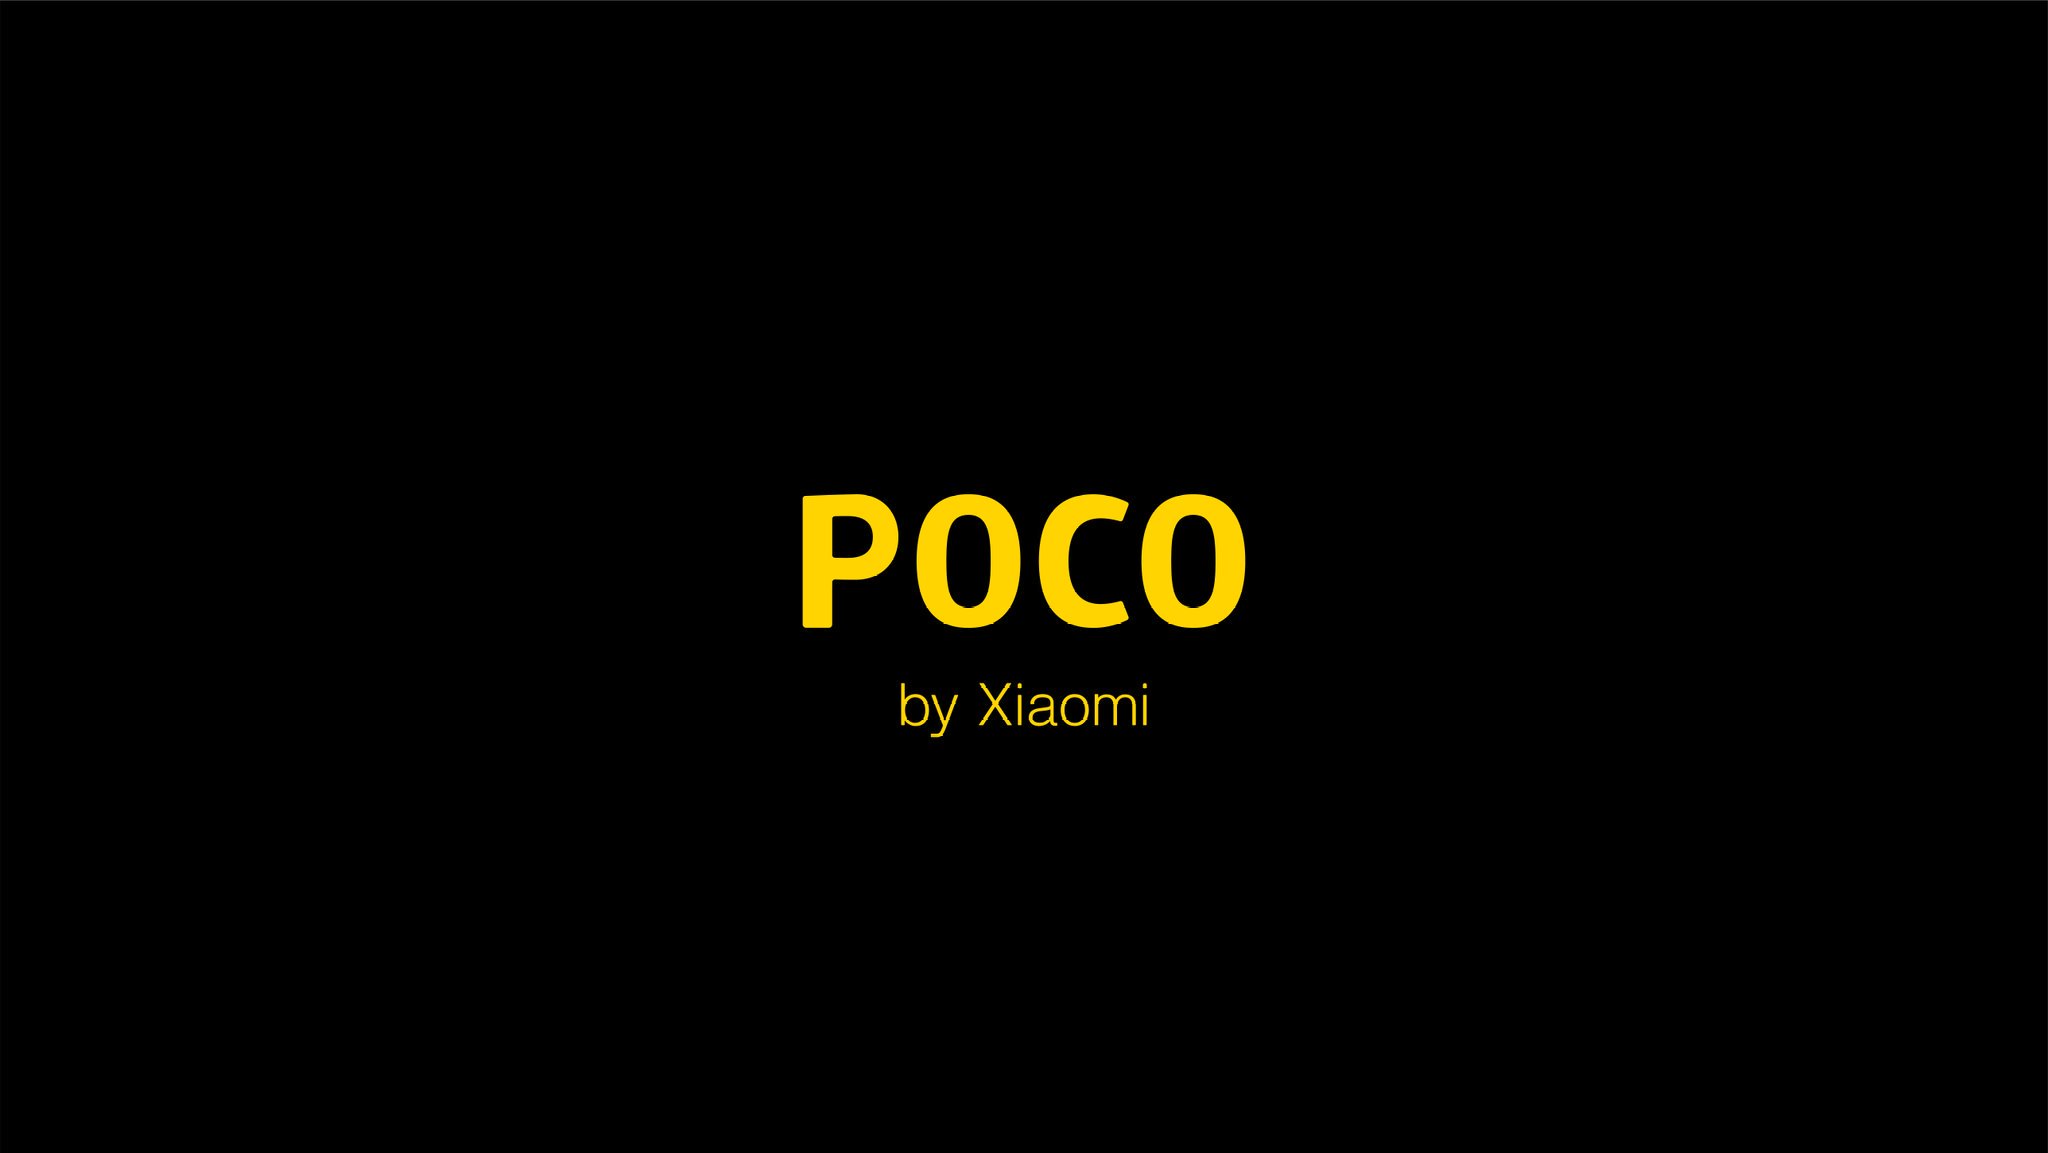 [Stable release] We gave POCO Launcher 2.0 beta apk a try, and here's what we found